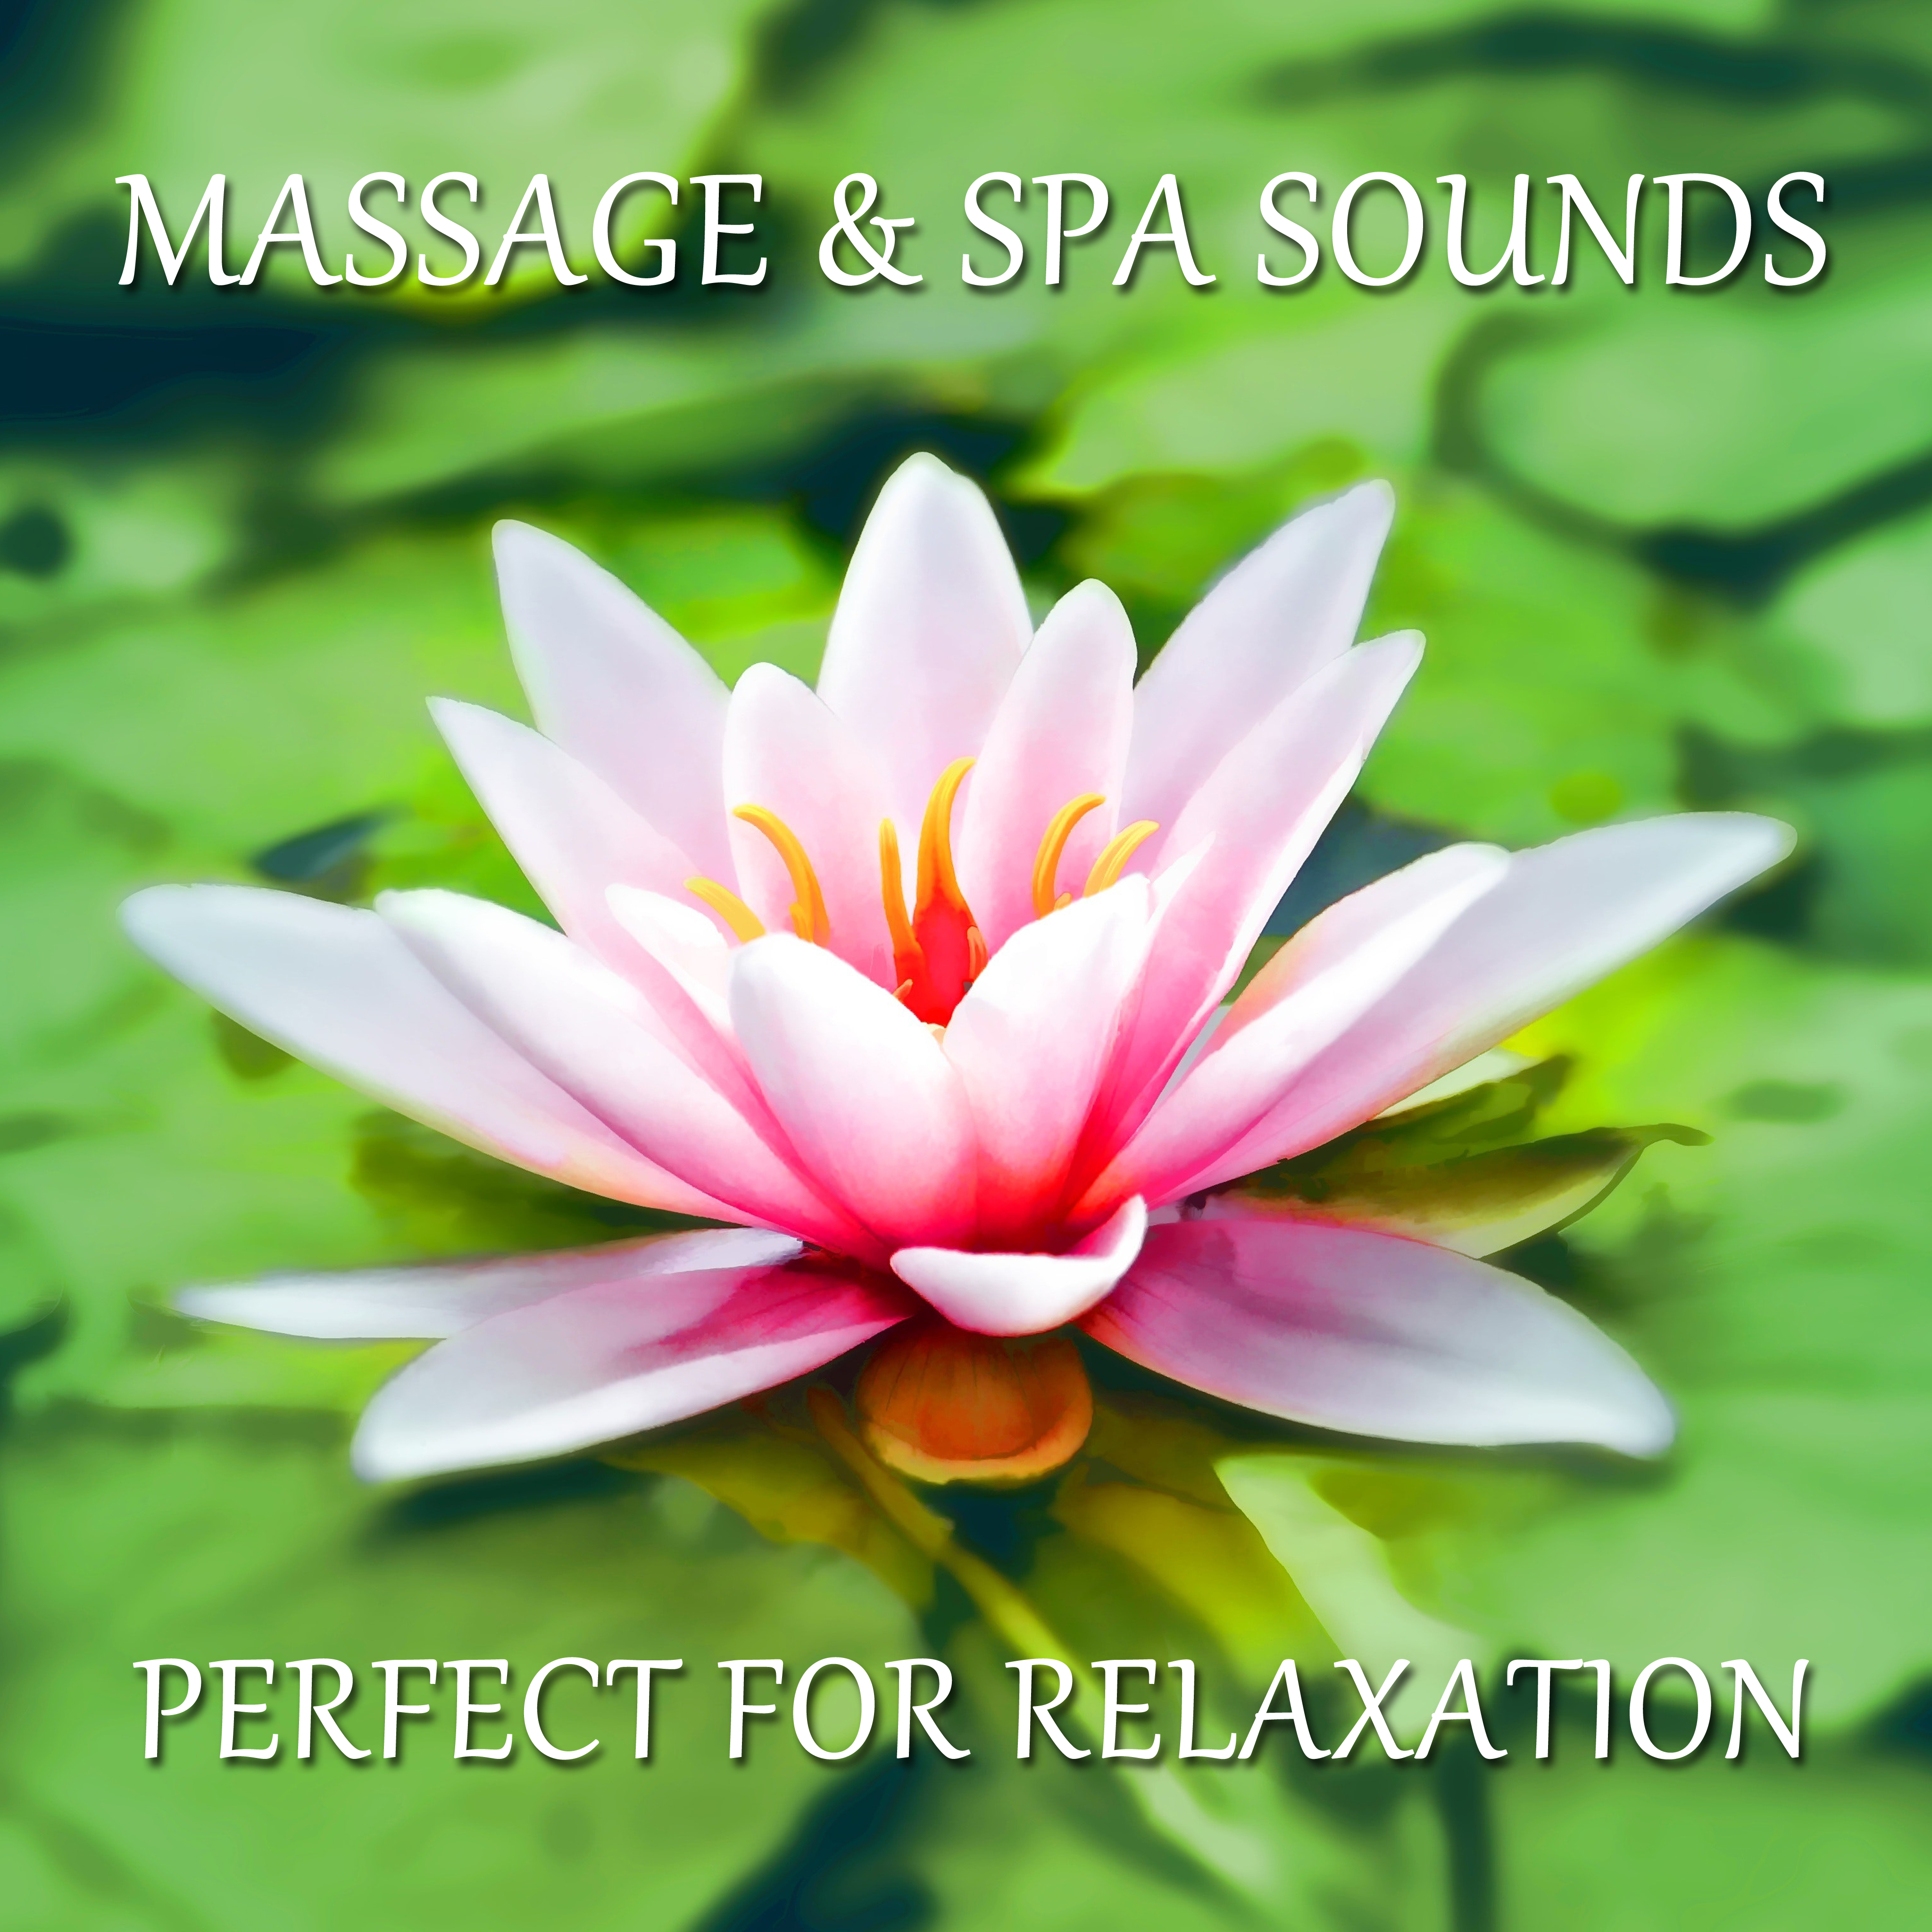 12 Massage & Spa Sounds - Perfect for Relaxation